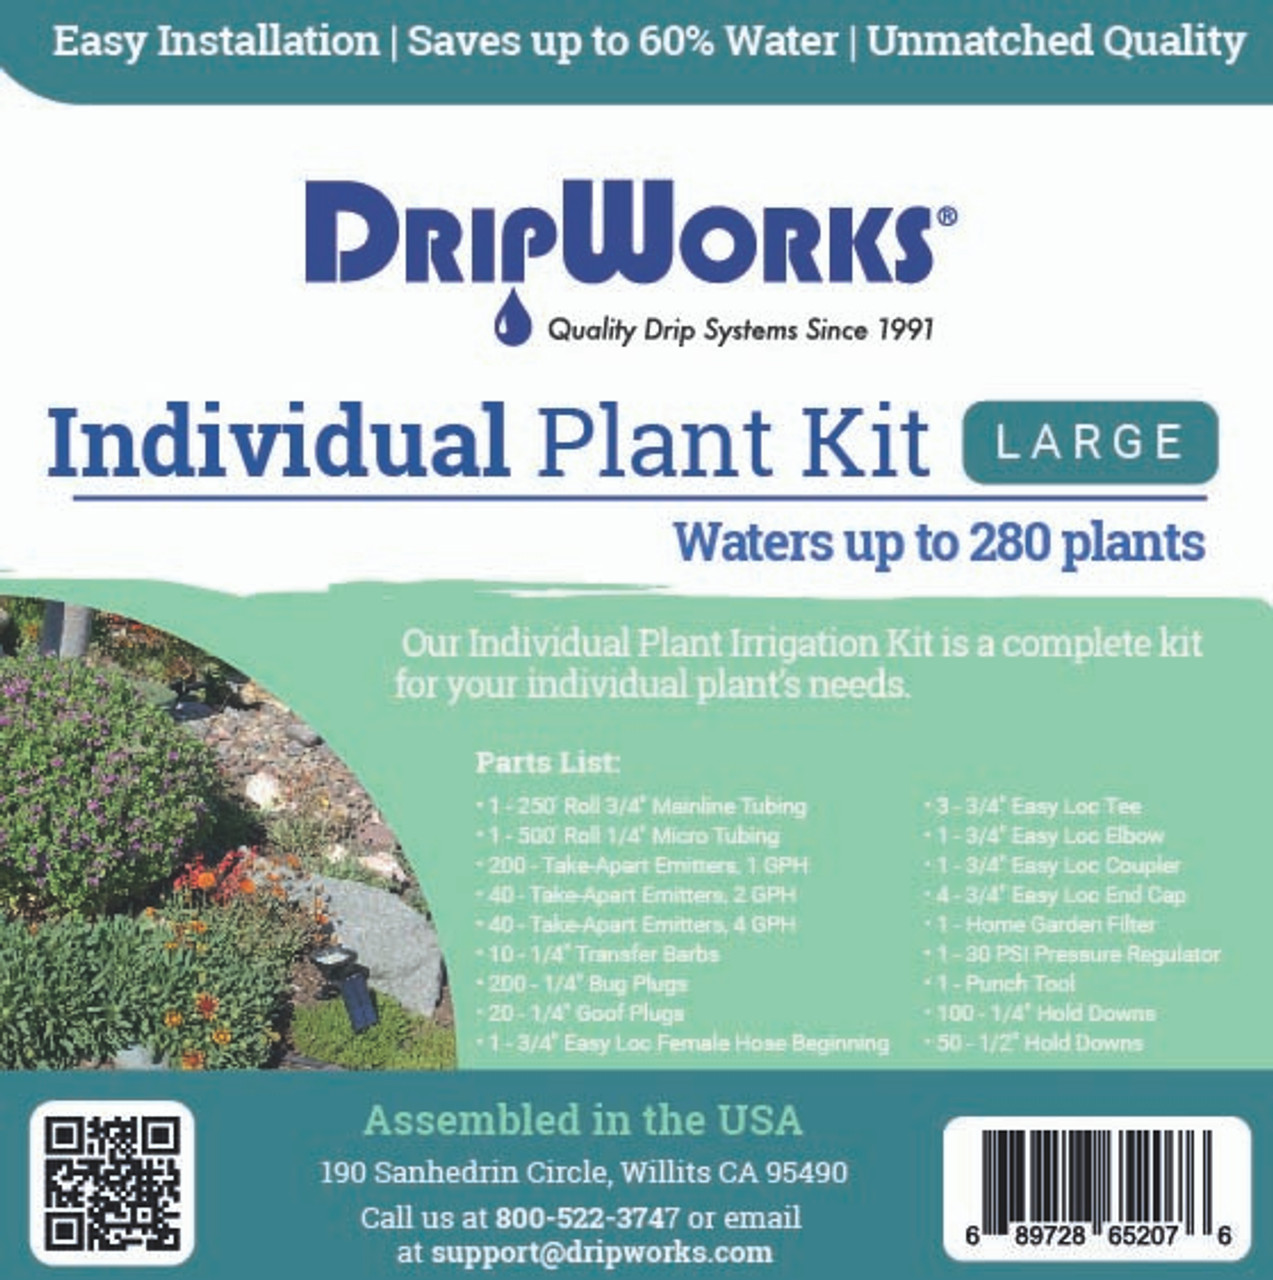 How to Grow Pot with Drip Irrigation - DripWorks